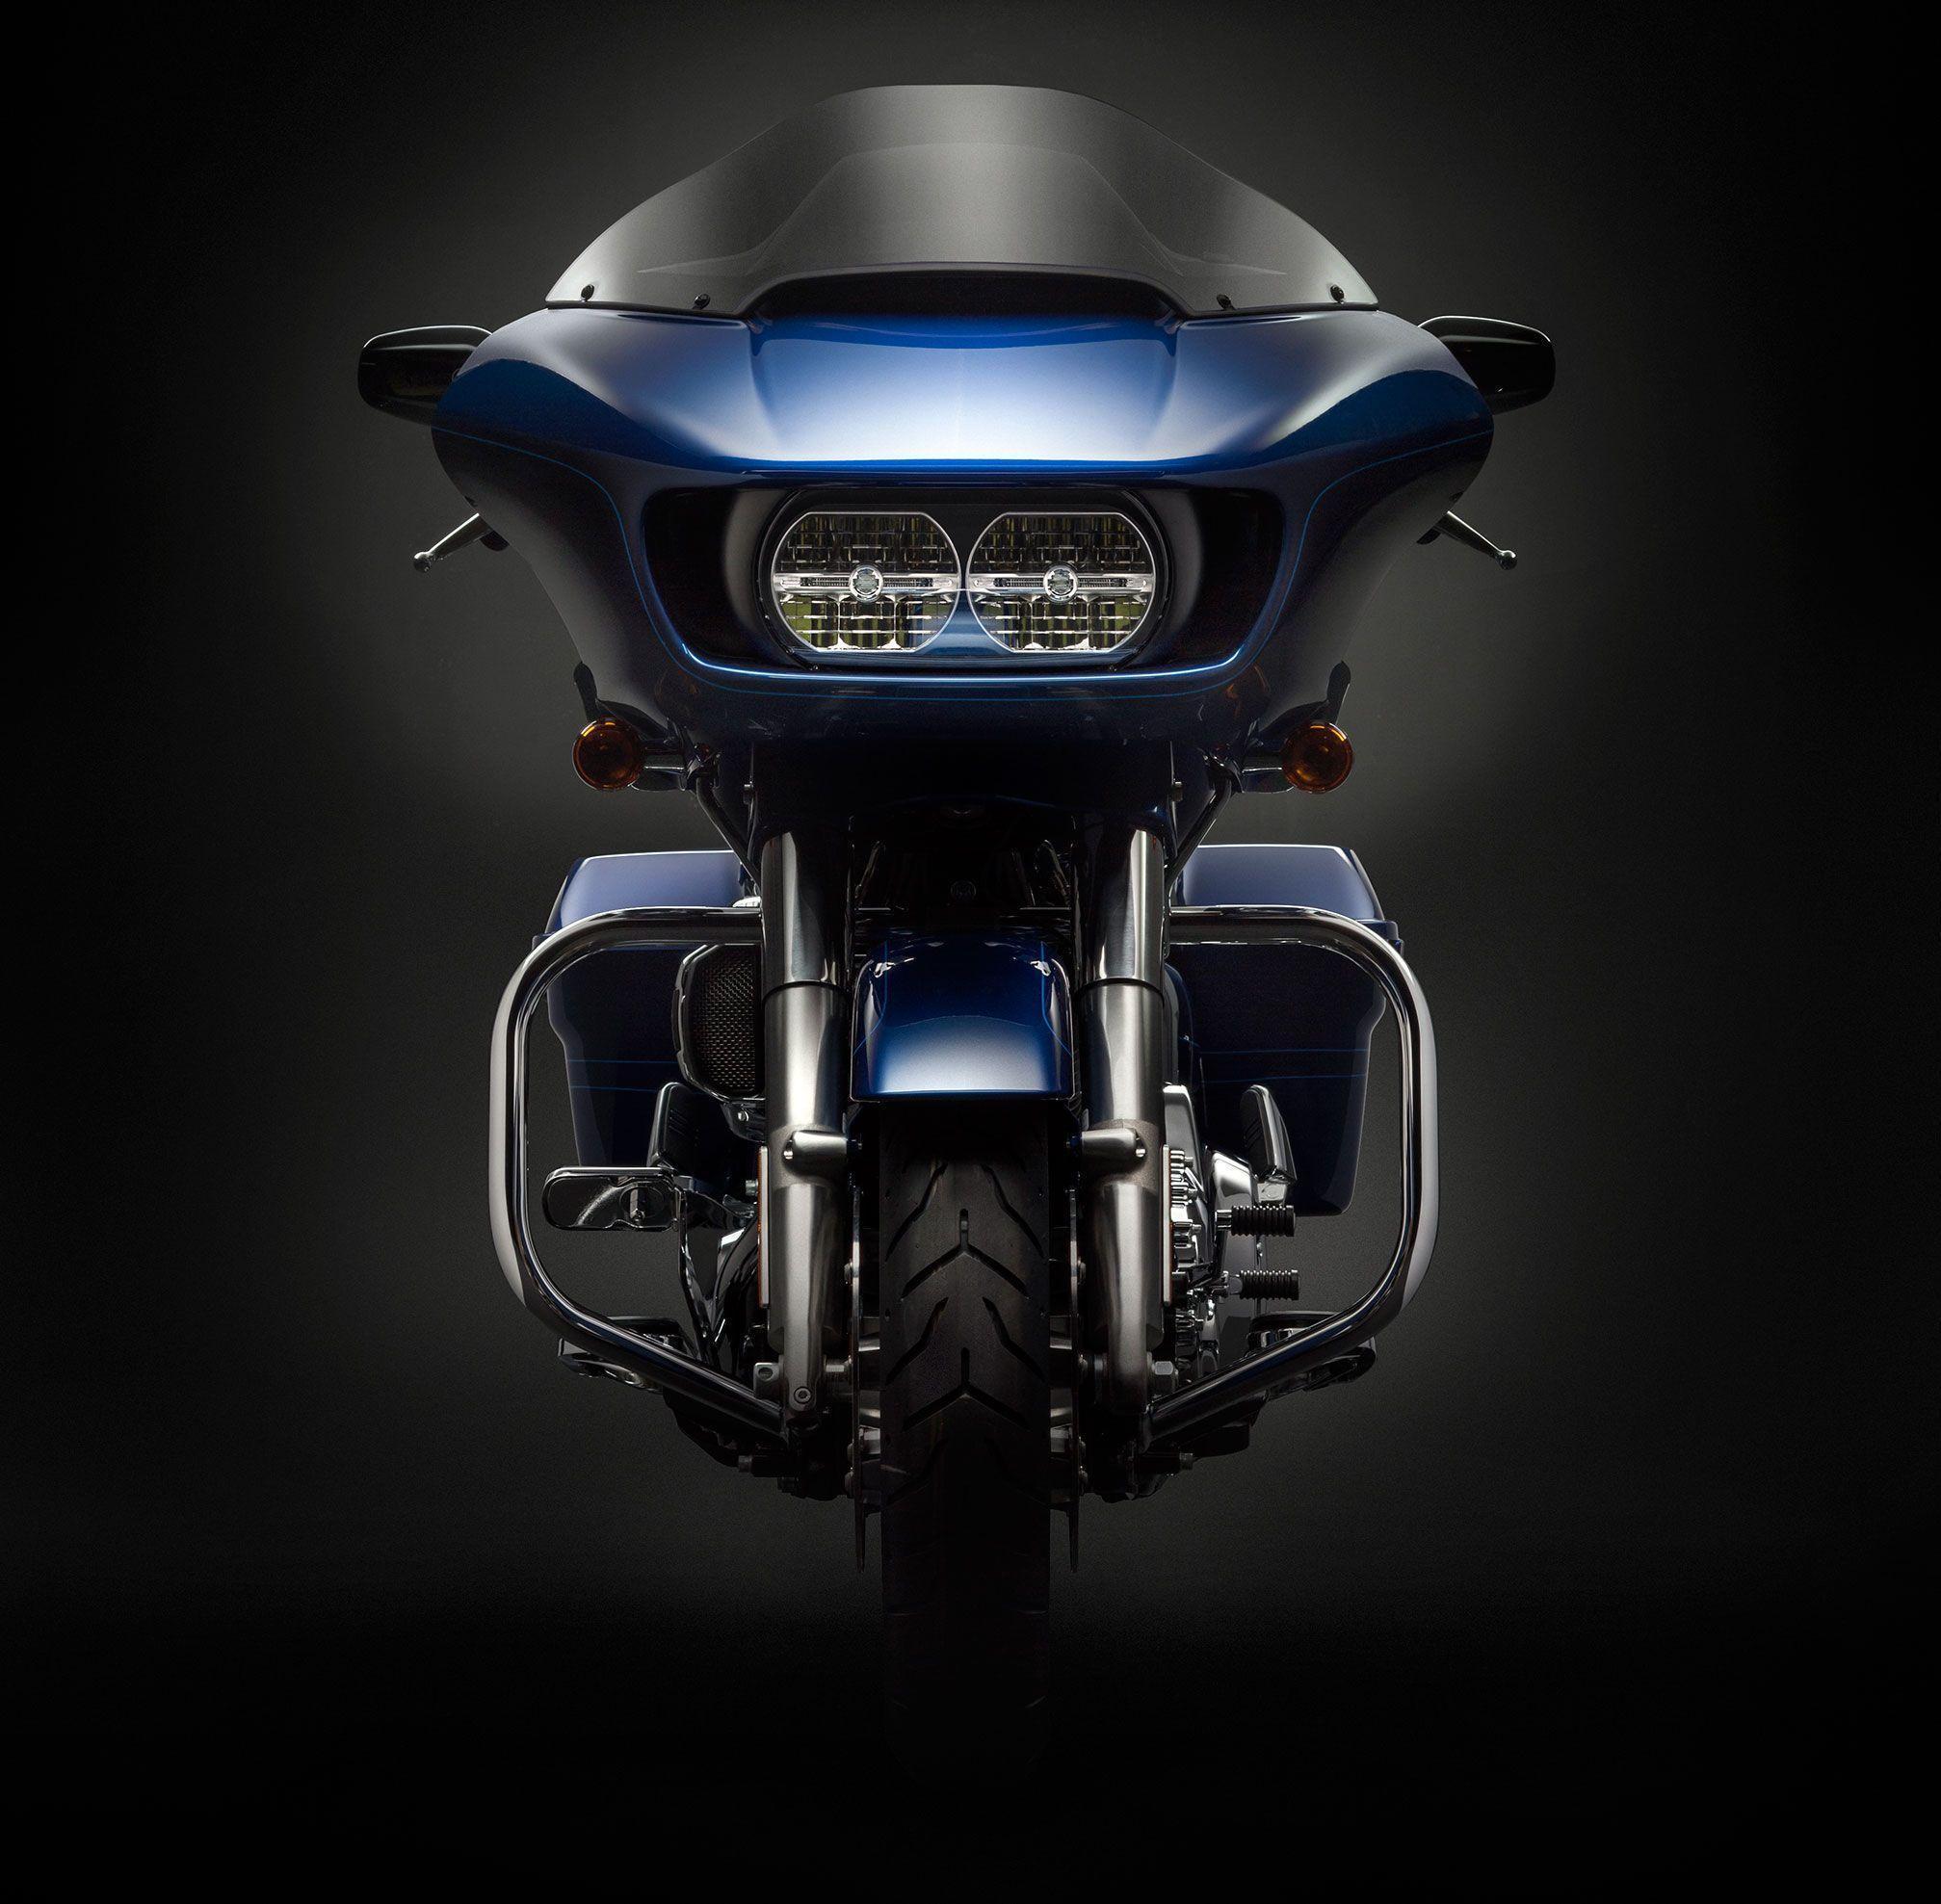 Road Glide Wallpapers